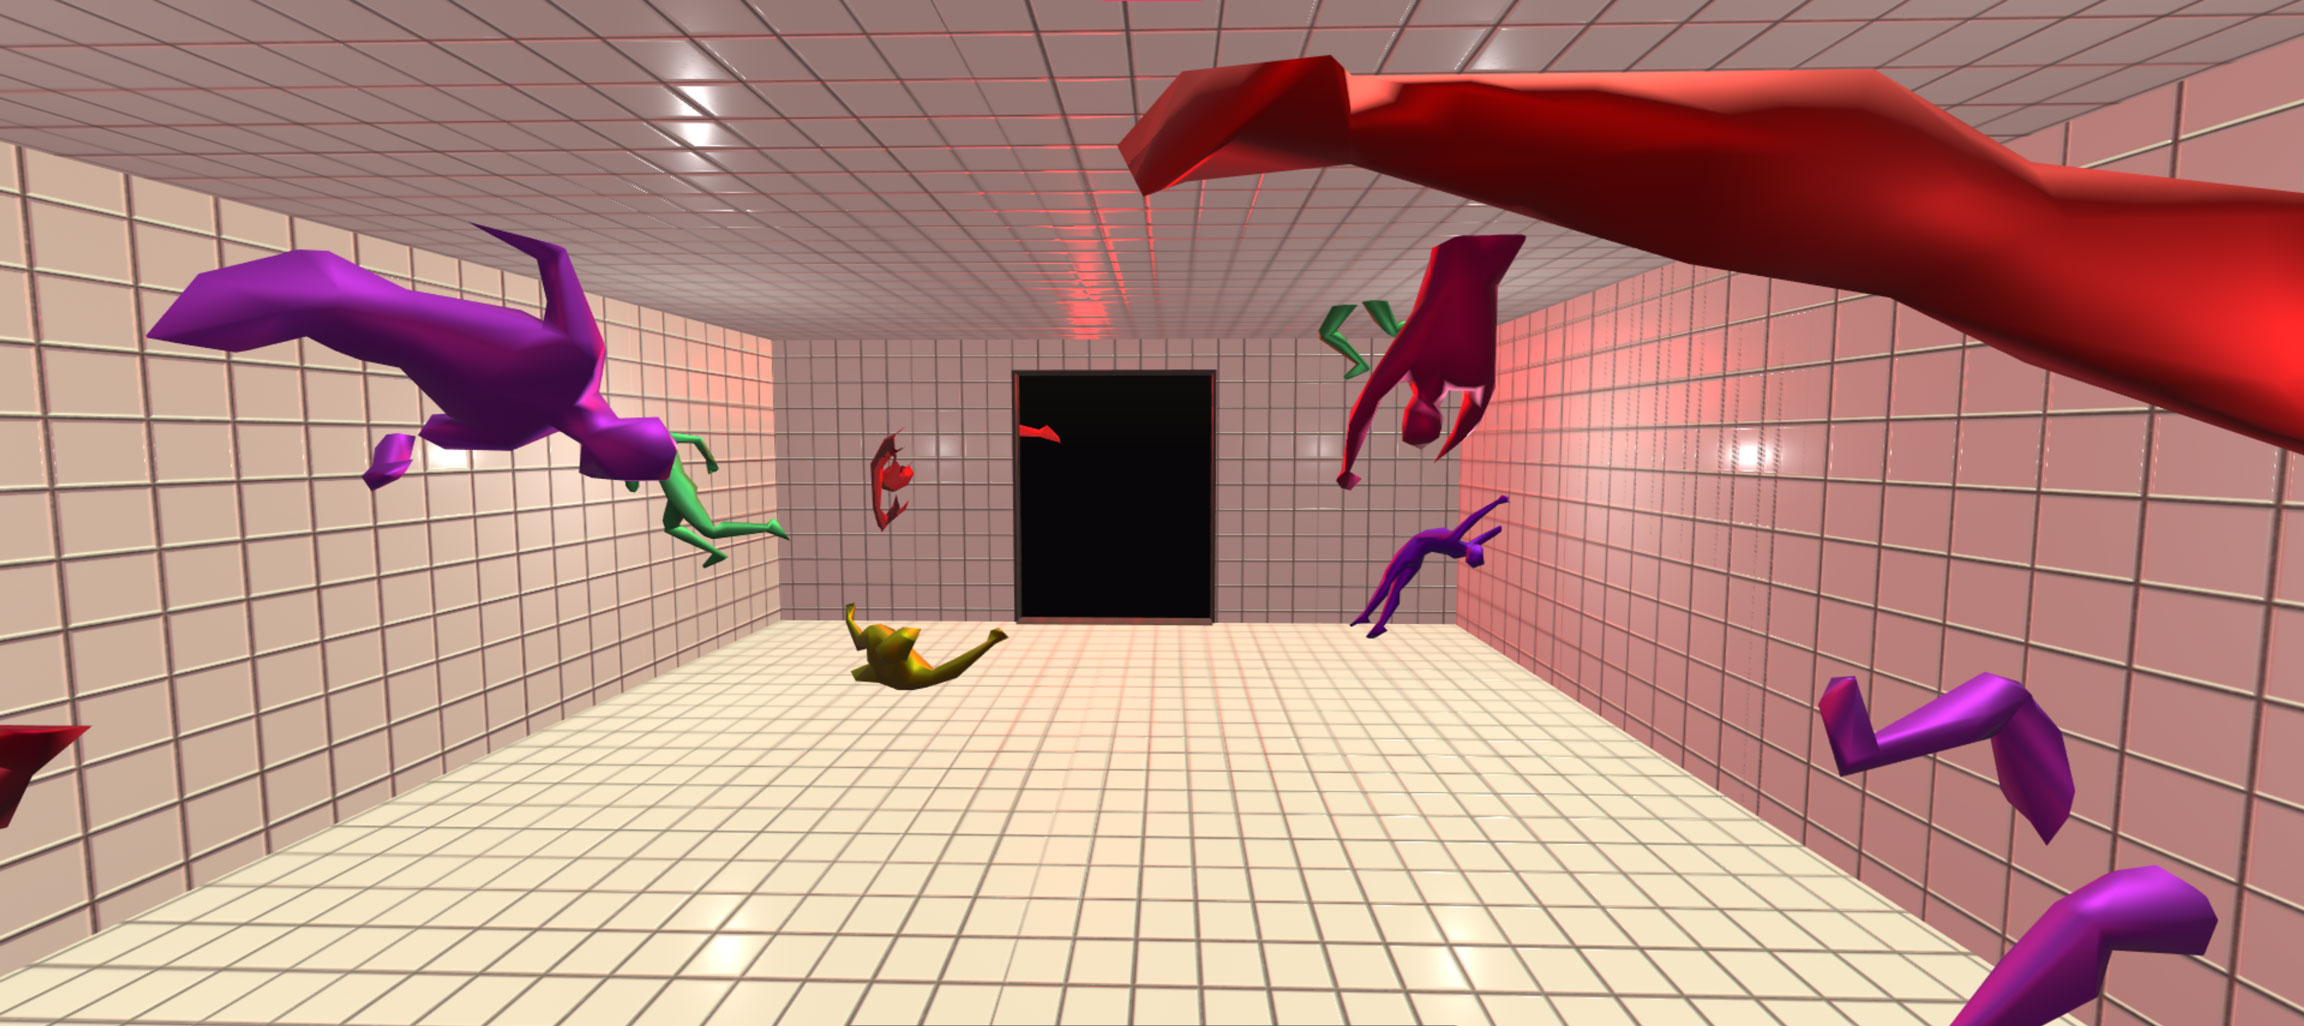 A tiled room with contorted and colorful bodies floating in air and coming through the walls. There is a door at the end of the room that is completely dark.